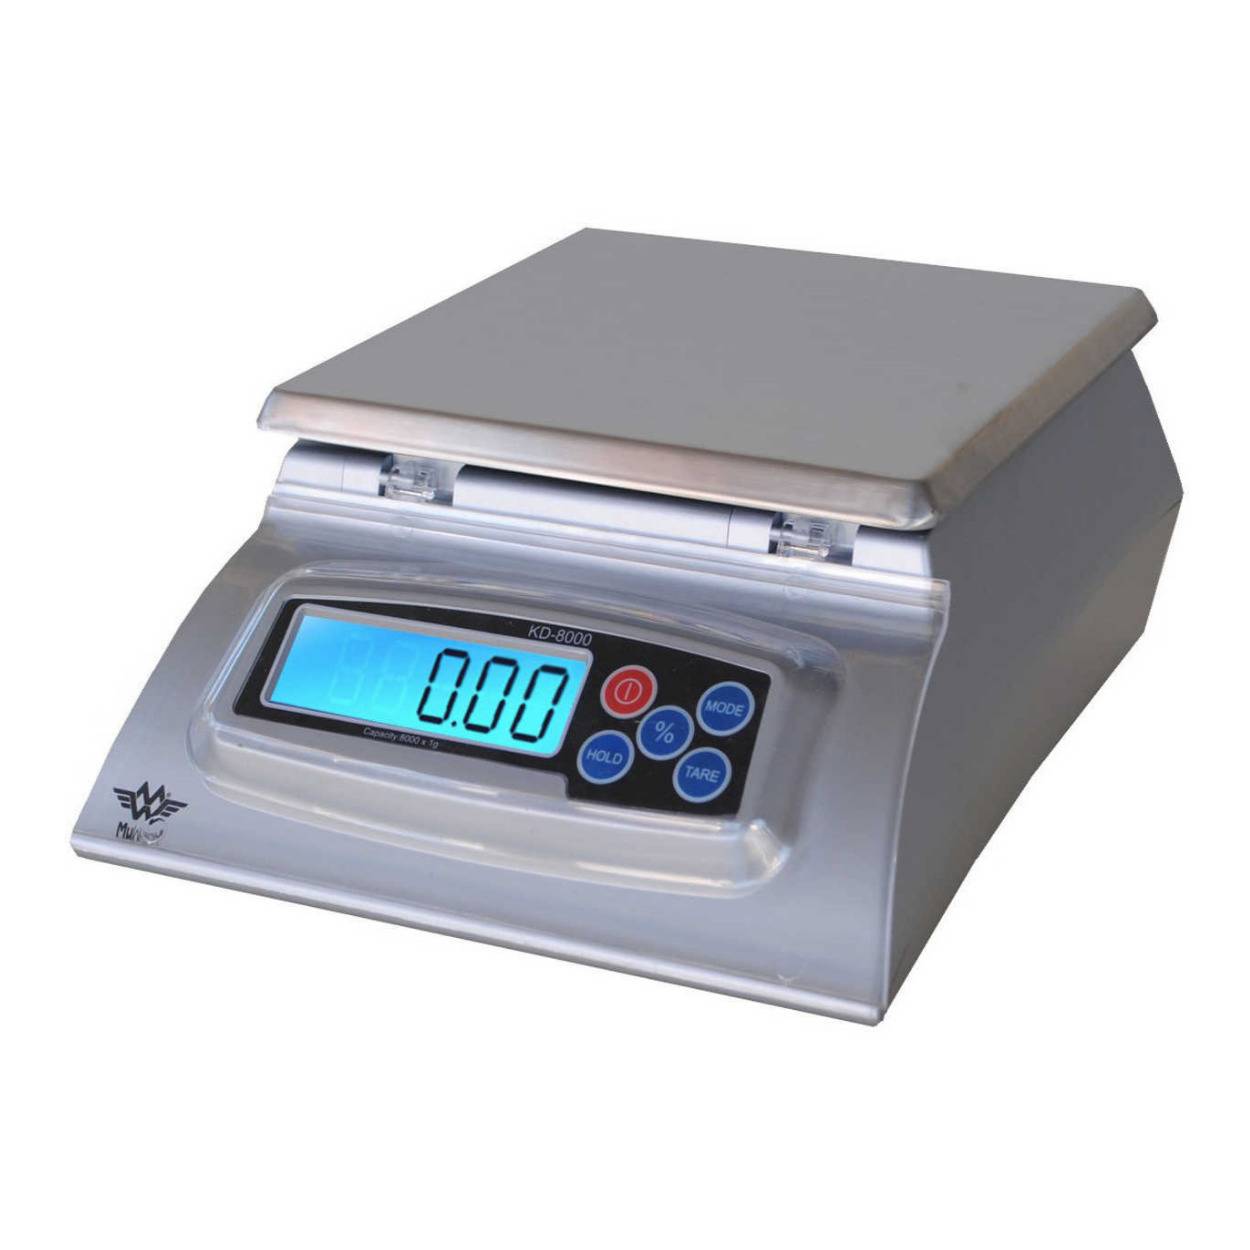 My Weigh KD-8000 Kitchen and Craft Digital Scale